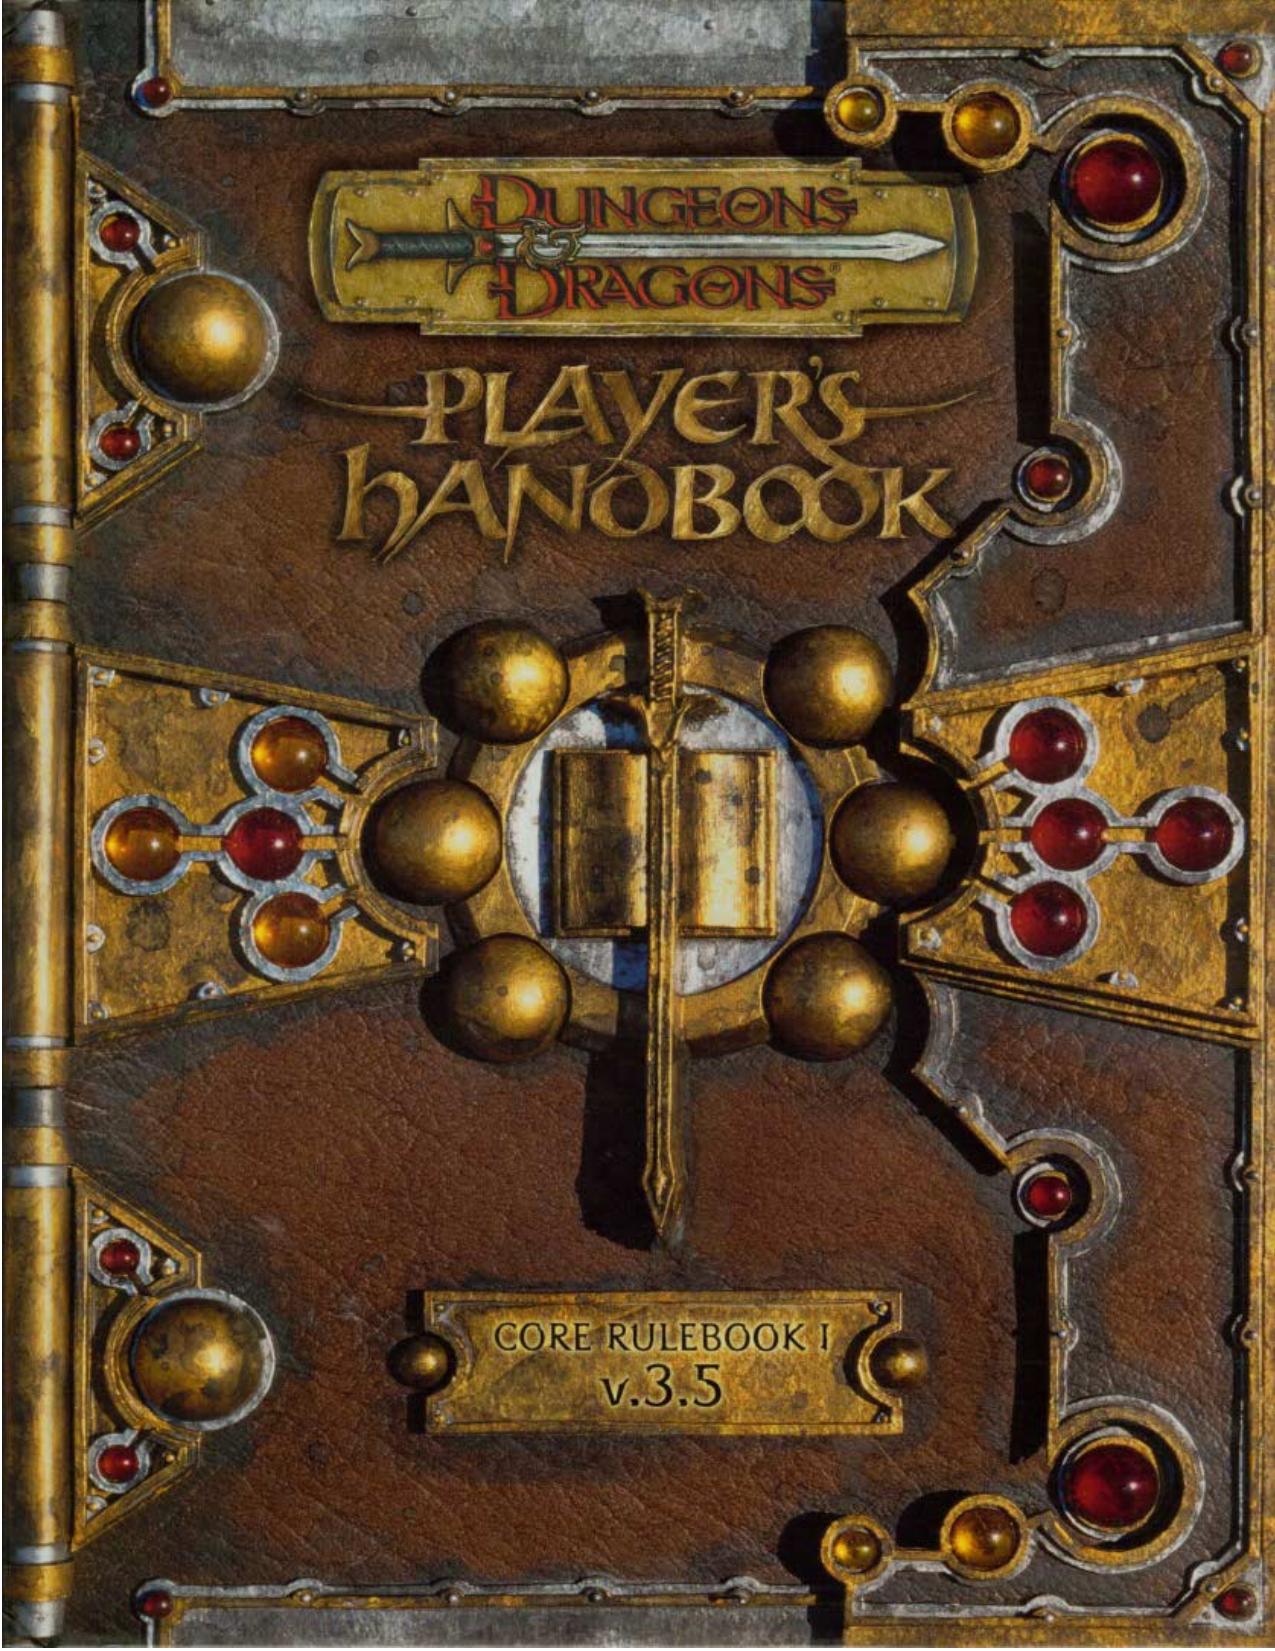 Dungeons & Dragons Player's Handbook: Core Rulebook I V.3.5